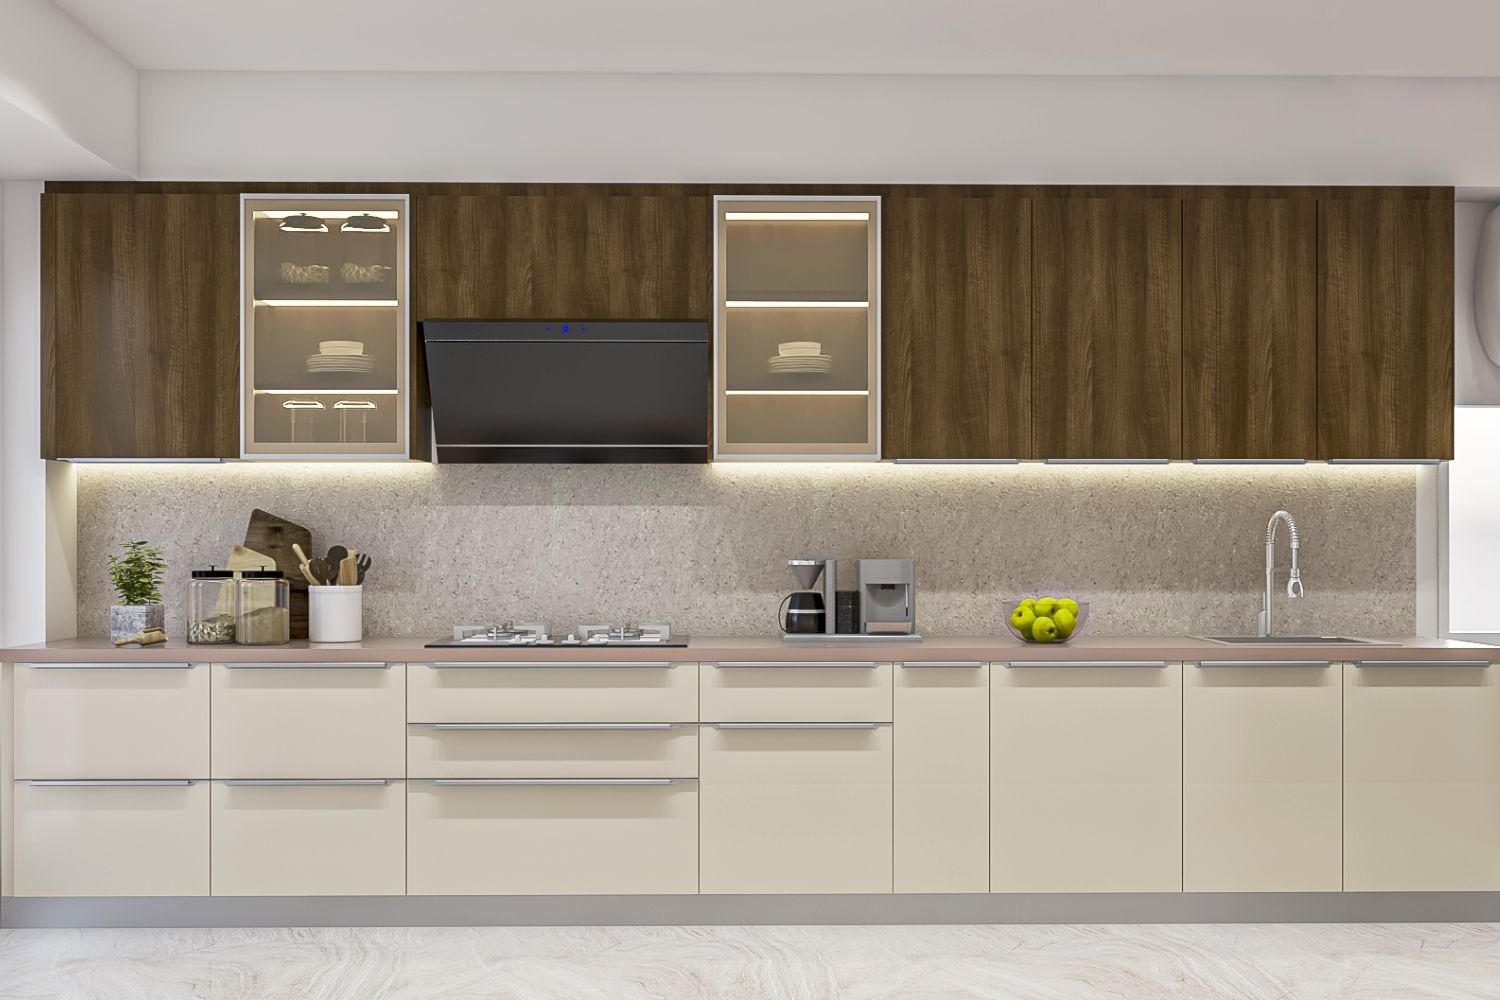 Modern Modular Straight Kitchen Cabinet Design With With Champagne And Wood Cabinets